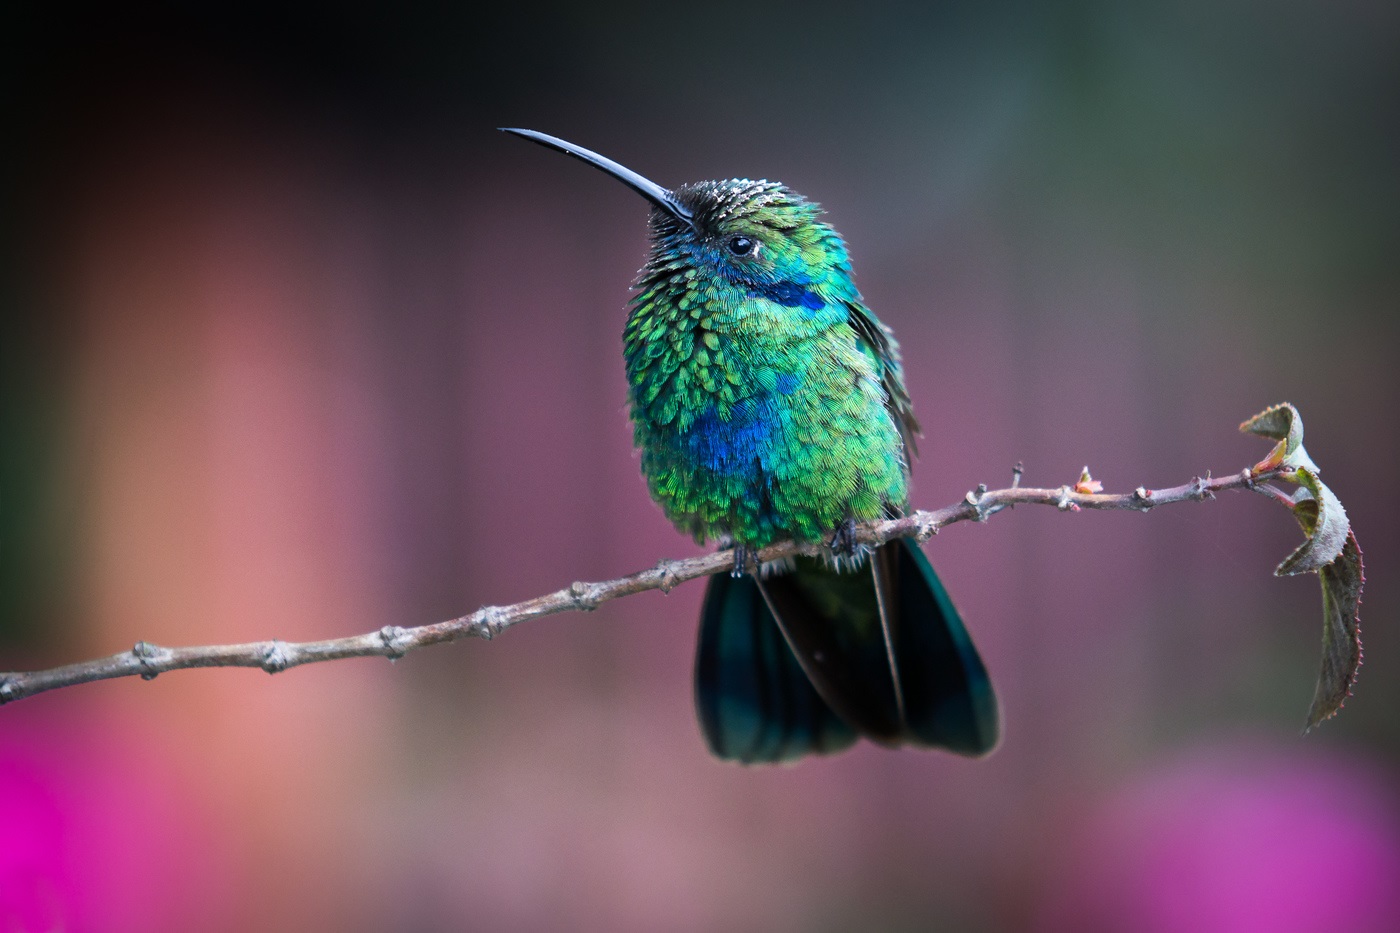 Colombian Andes: a photo of a hummingbird on a branch